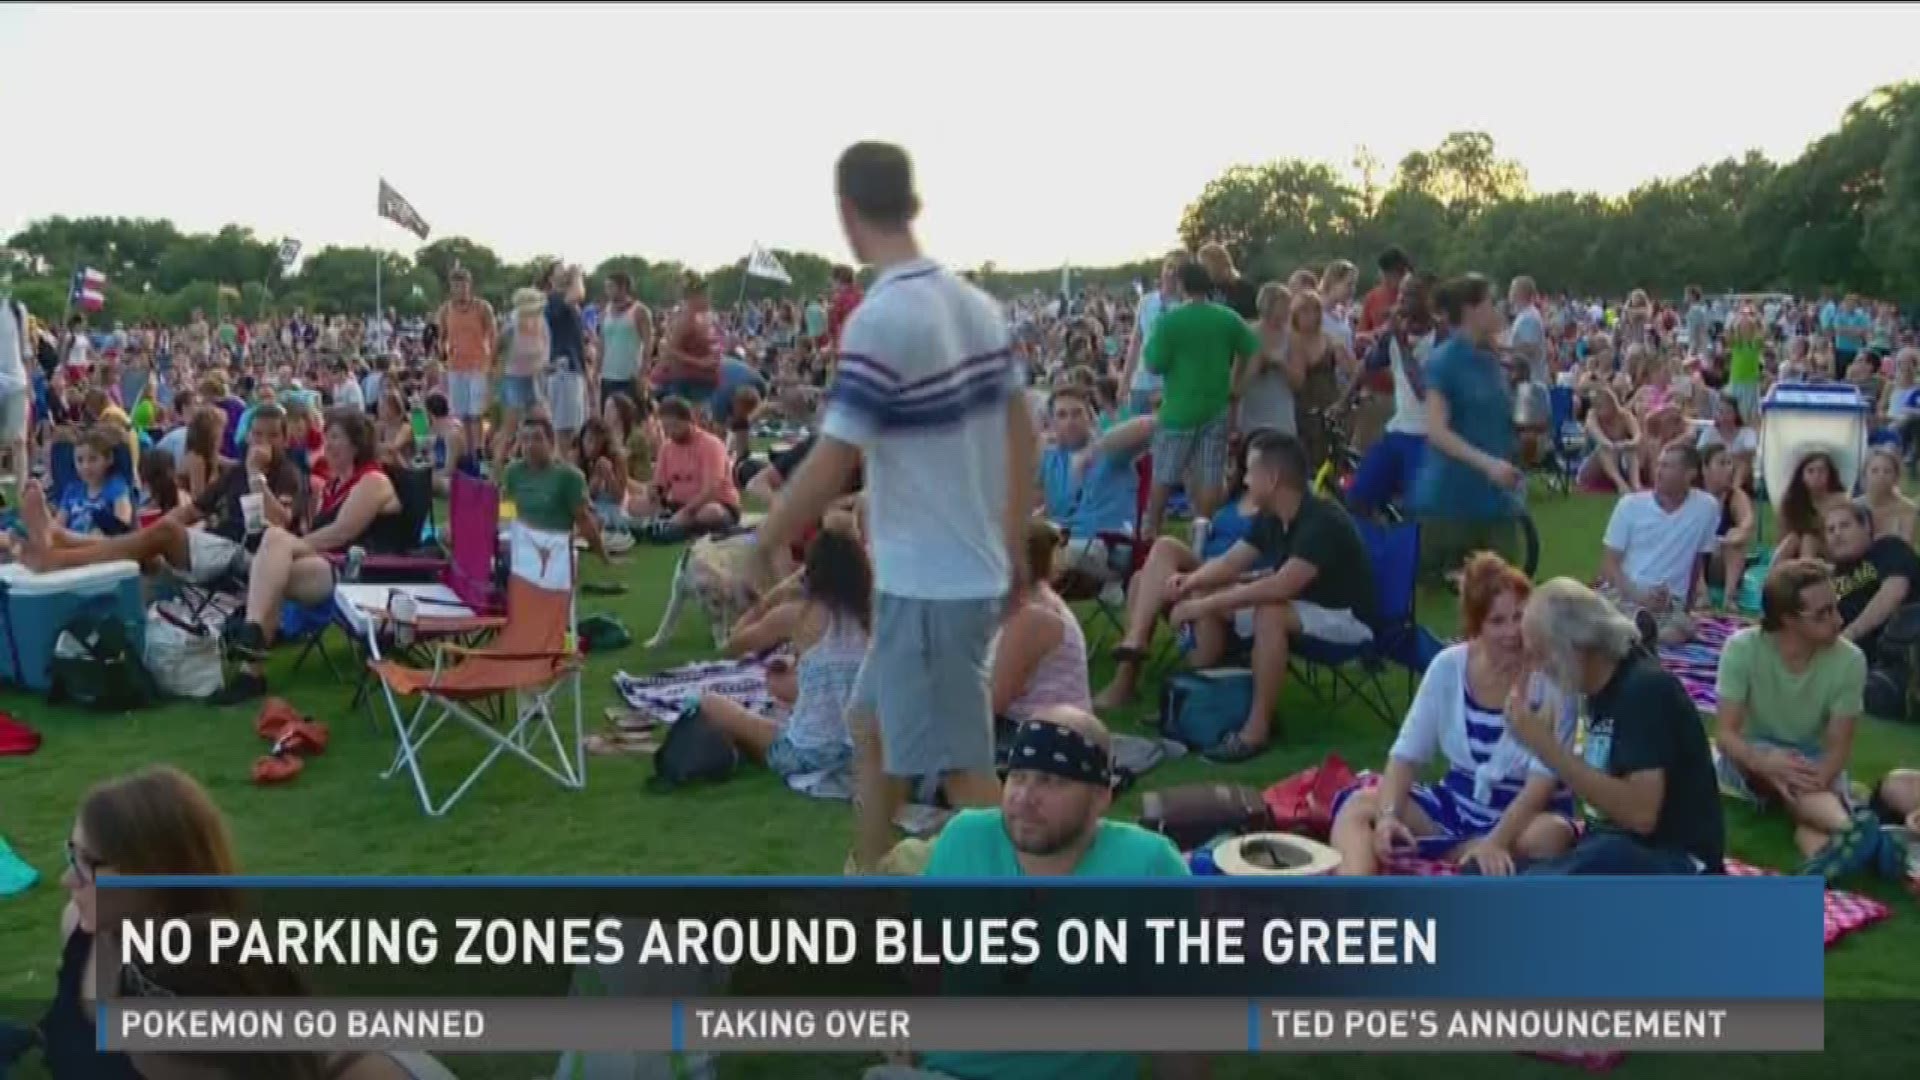 Tonight hundreds of people will fill the Great Lawn for Blues on the Green.